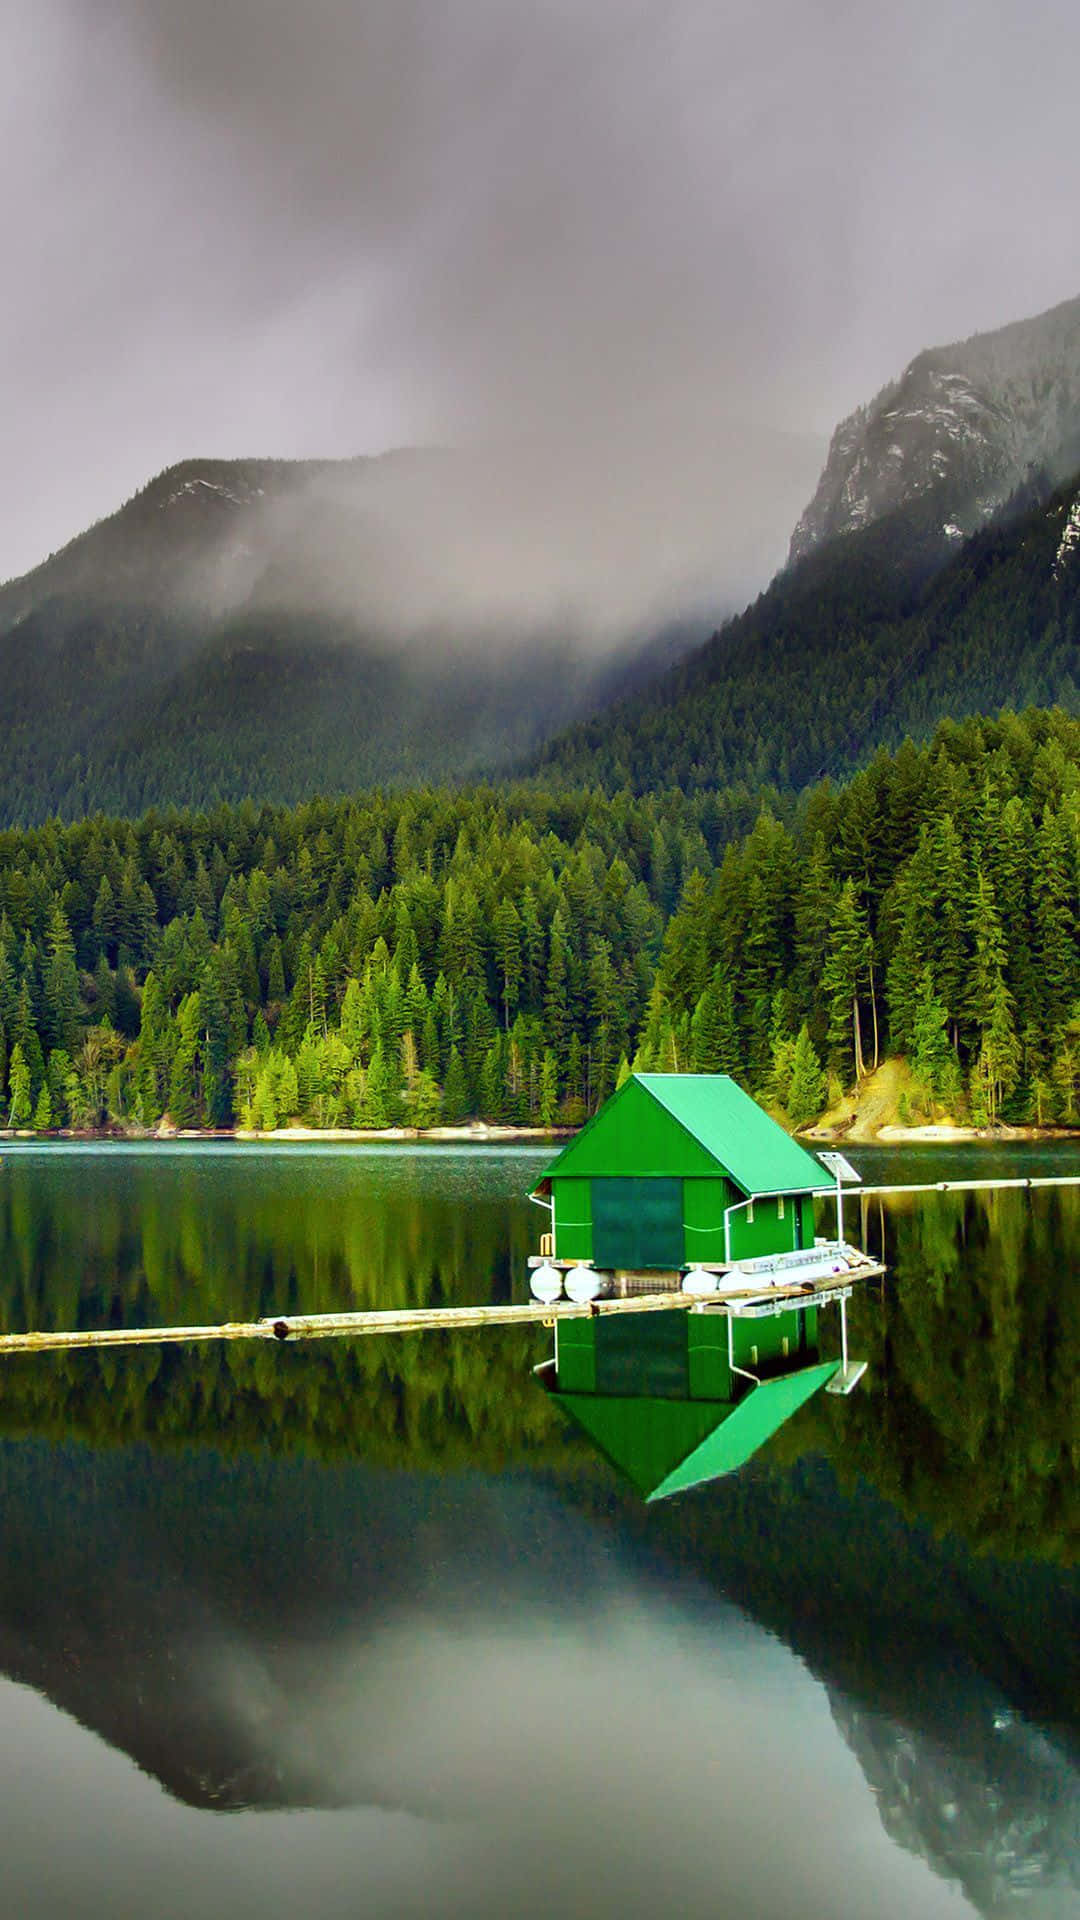 Green Floating House Nature Iphone Wallpaper